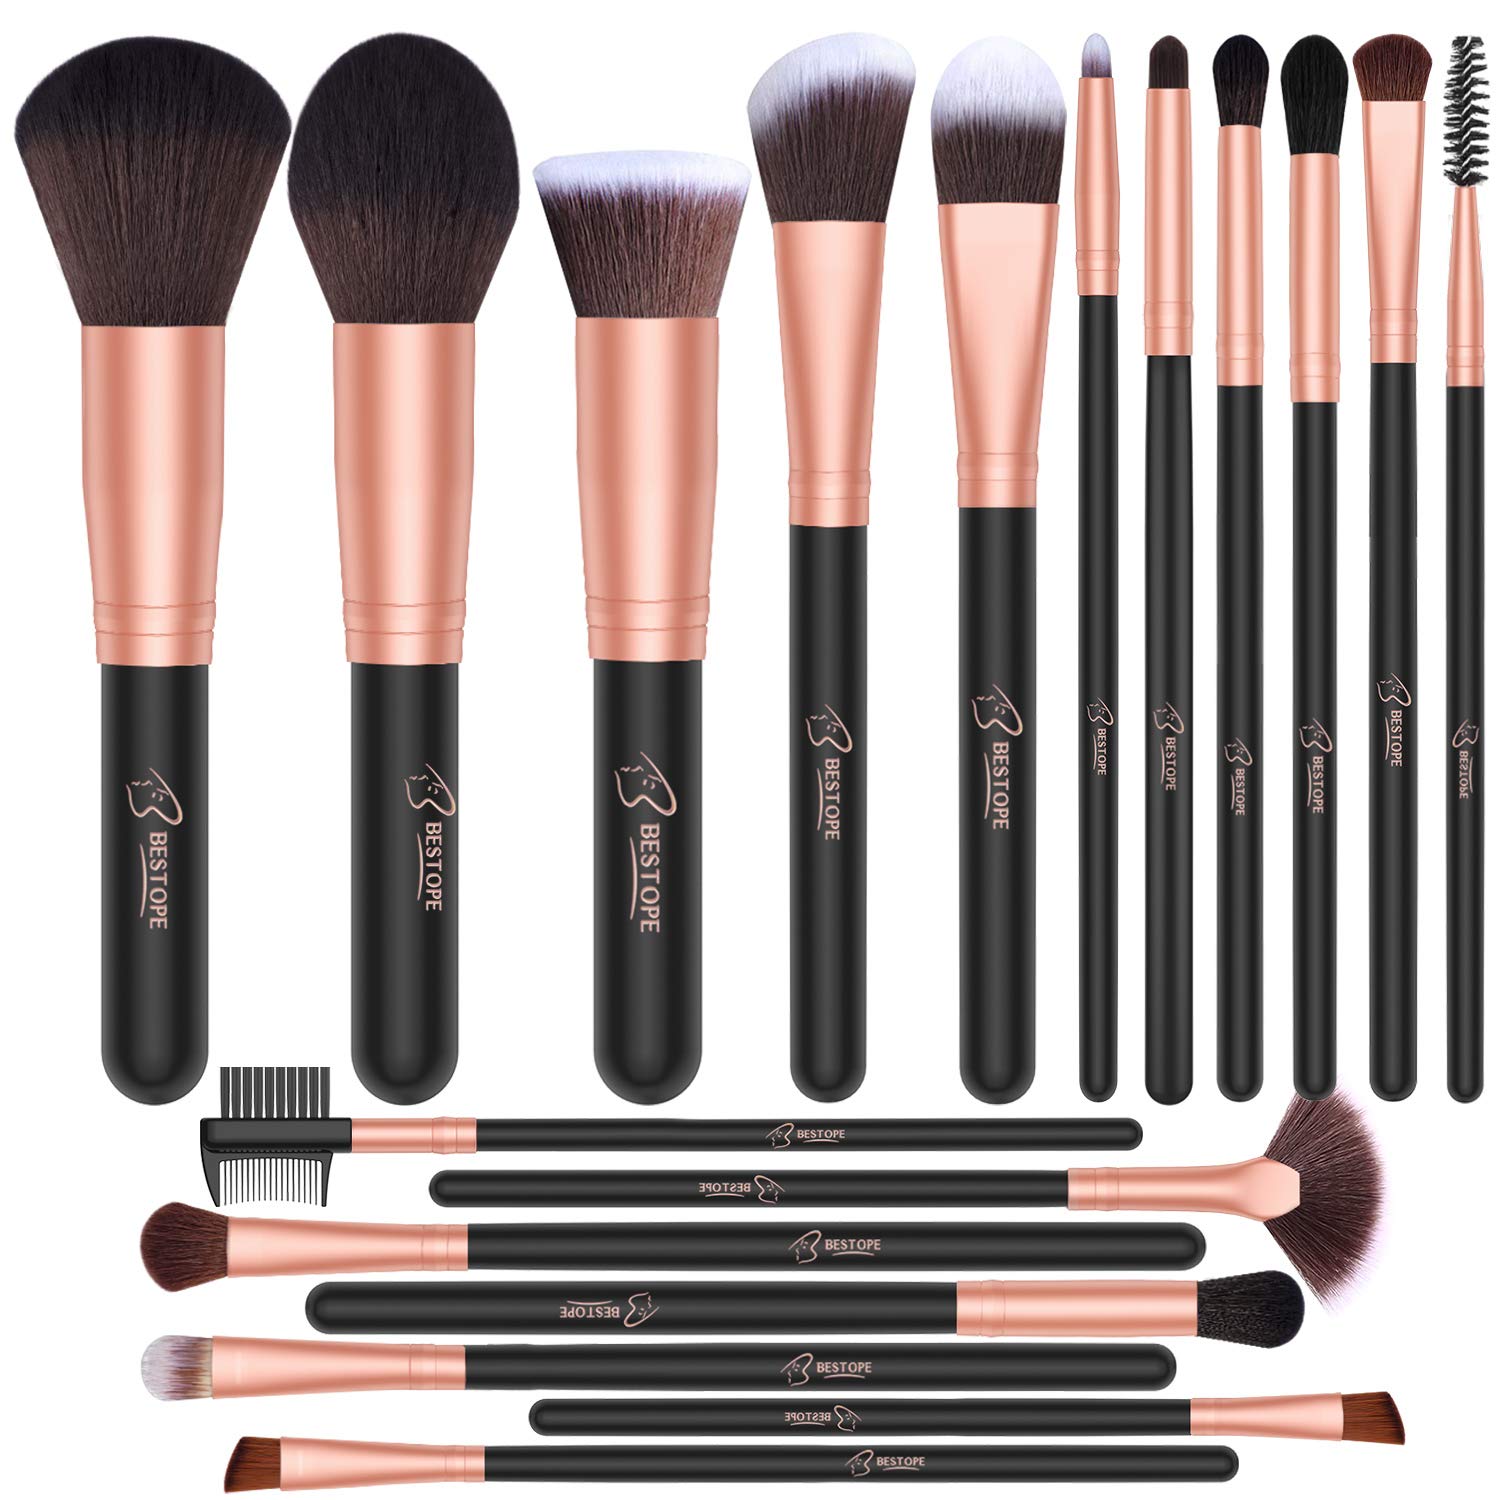 Who makes the best makeup brushes